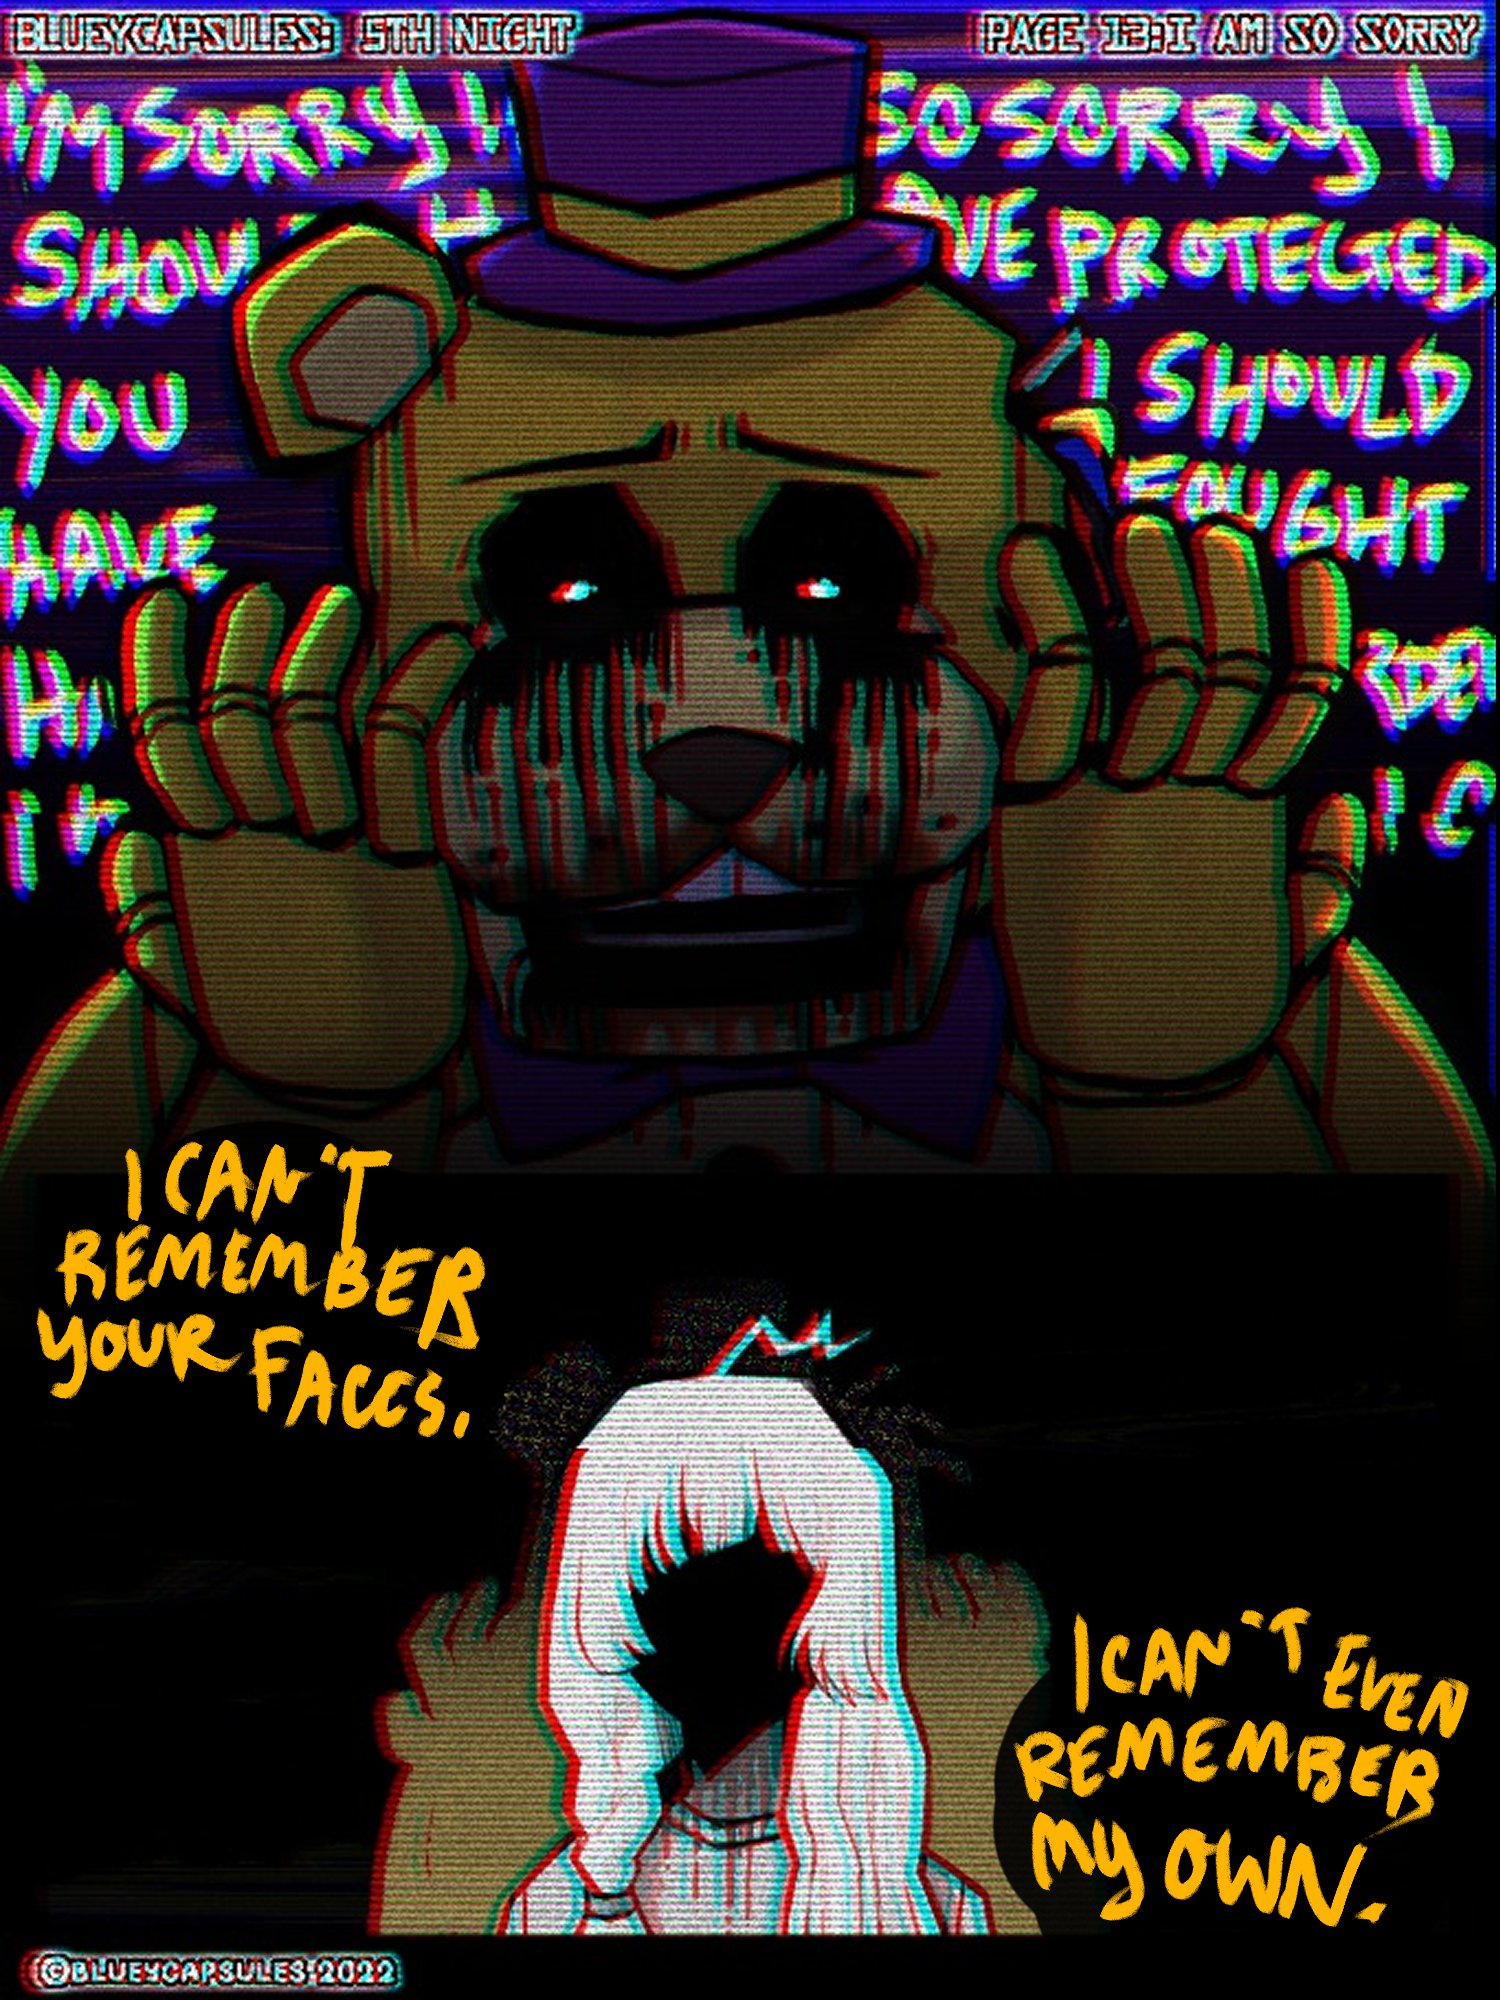 Bluey Capsules on X: Sorry William, we didn't know what you wanted! #FNAF   / X